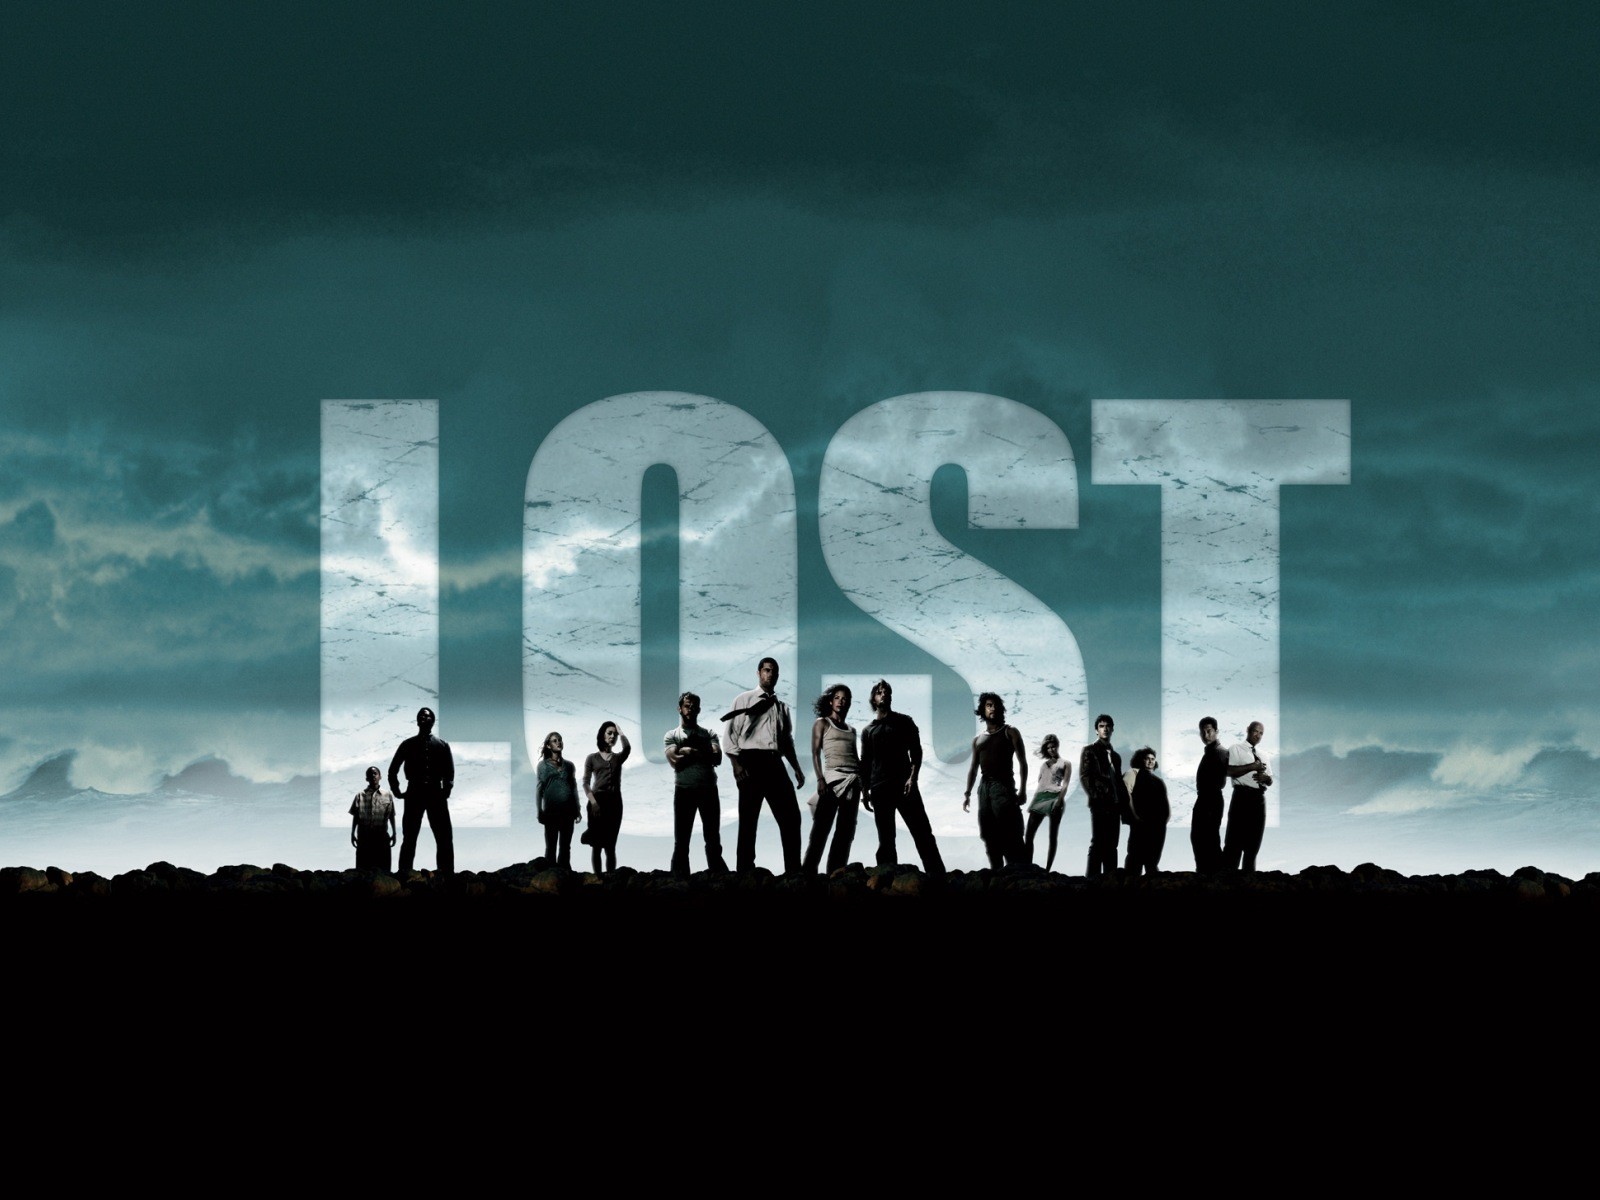 Lost HD wallpapers (2) #16 - 1600x1200